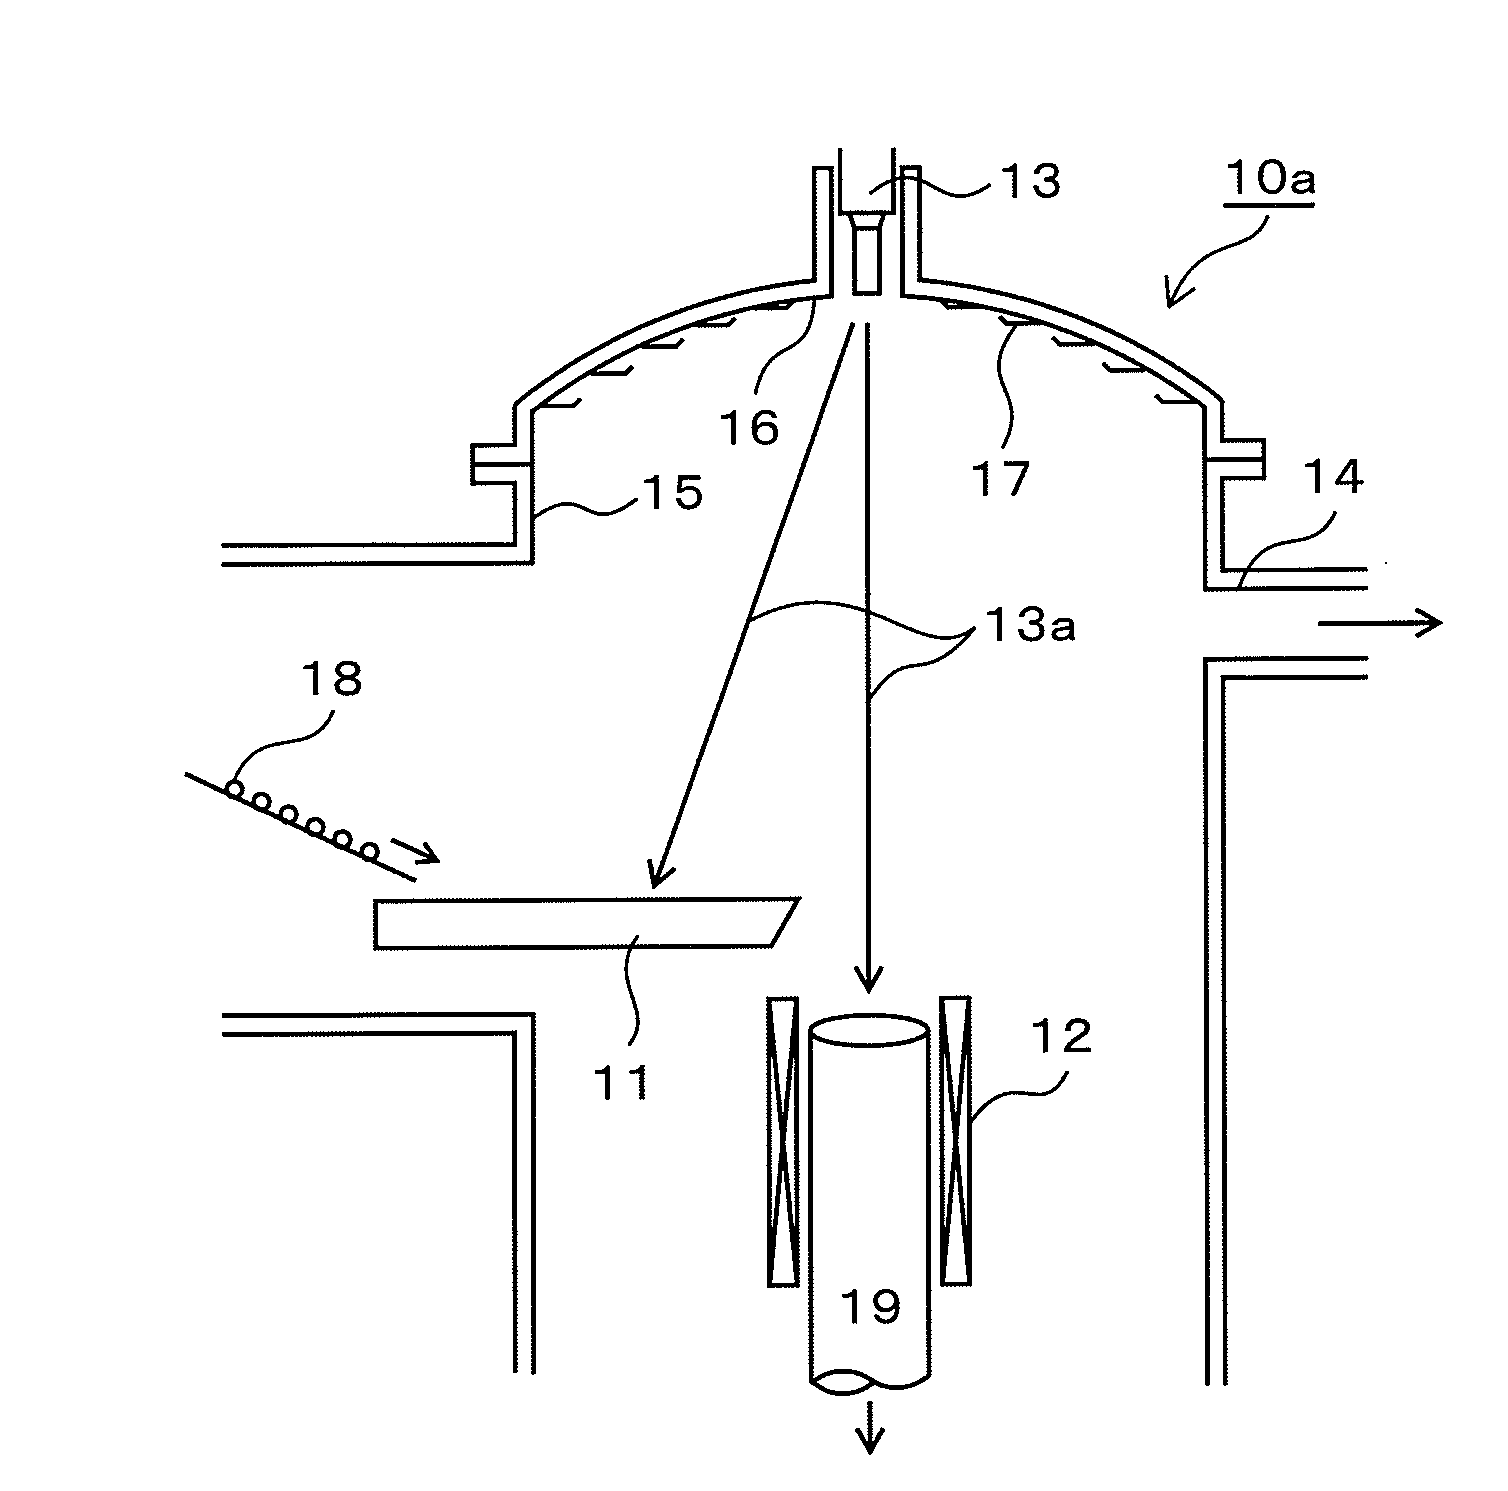 Apparatus for melting metal by electron beams and process for producing high-melting metal ingot using this apparatus